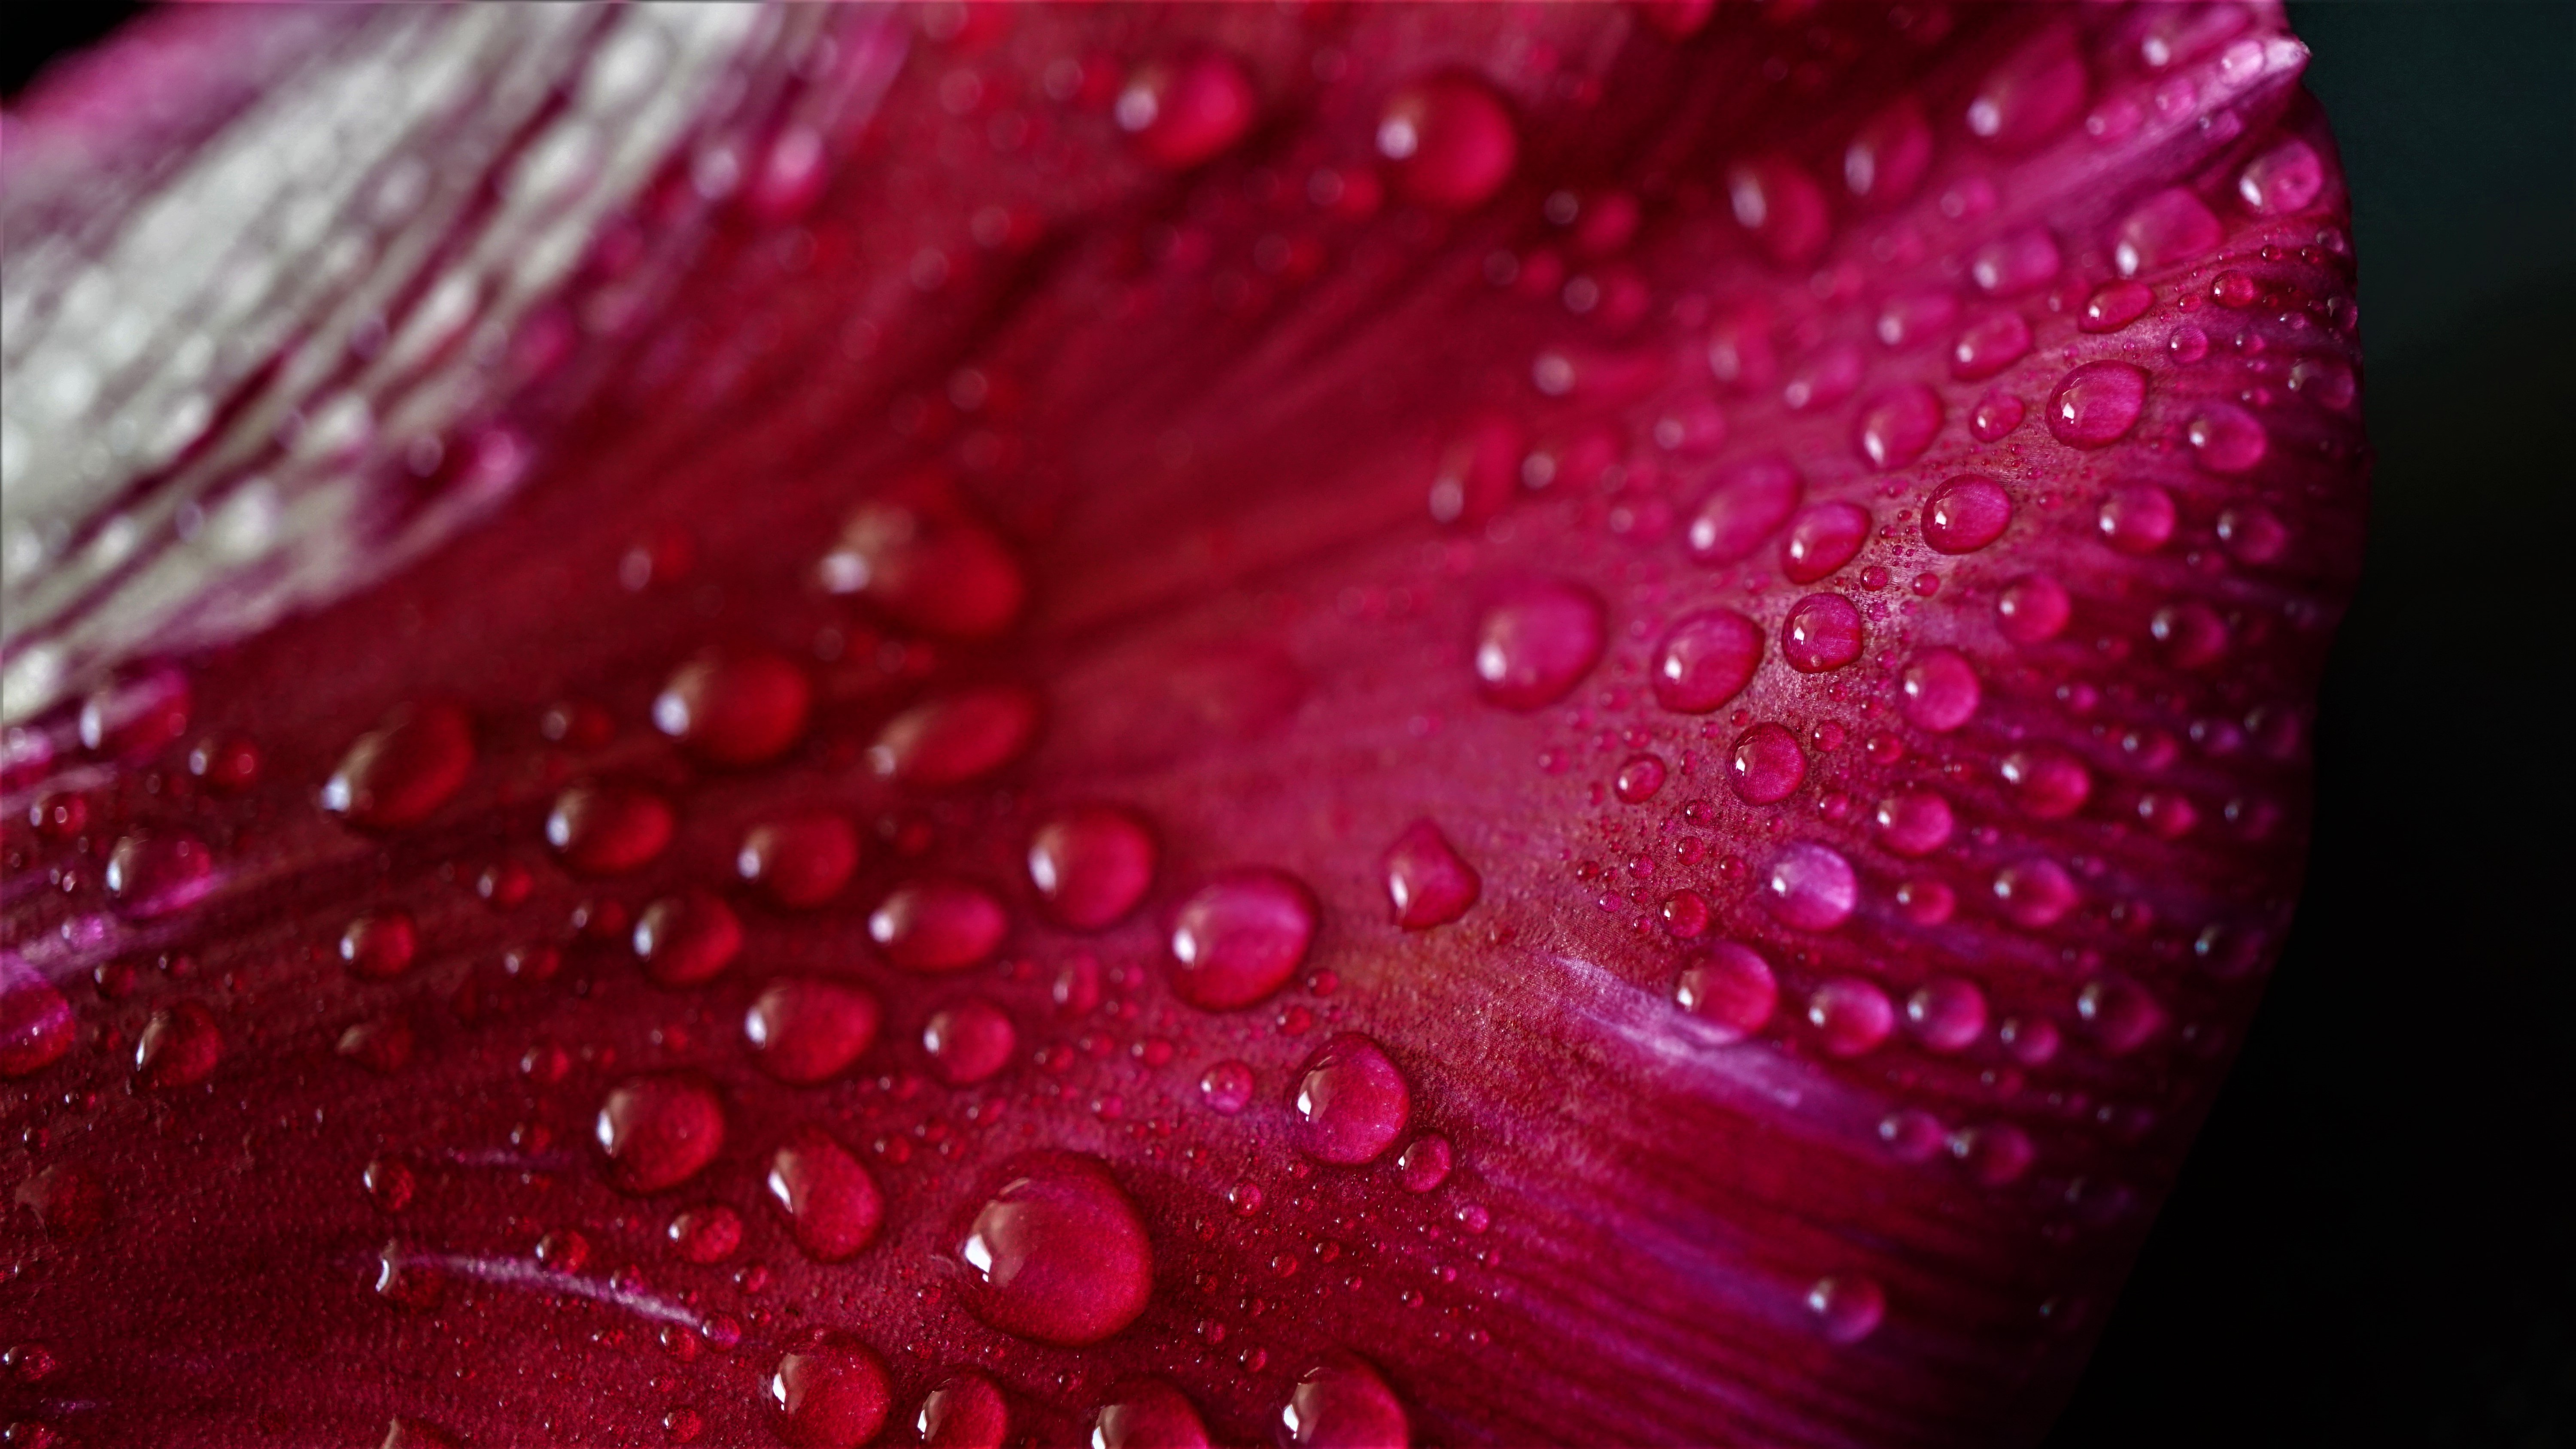 Water Droplets on a Pink Tulip Petal